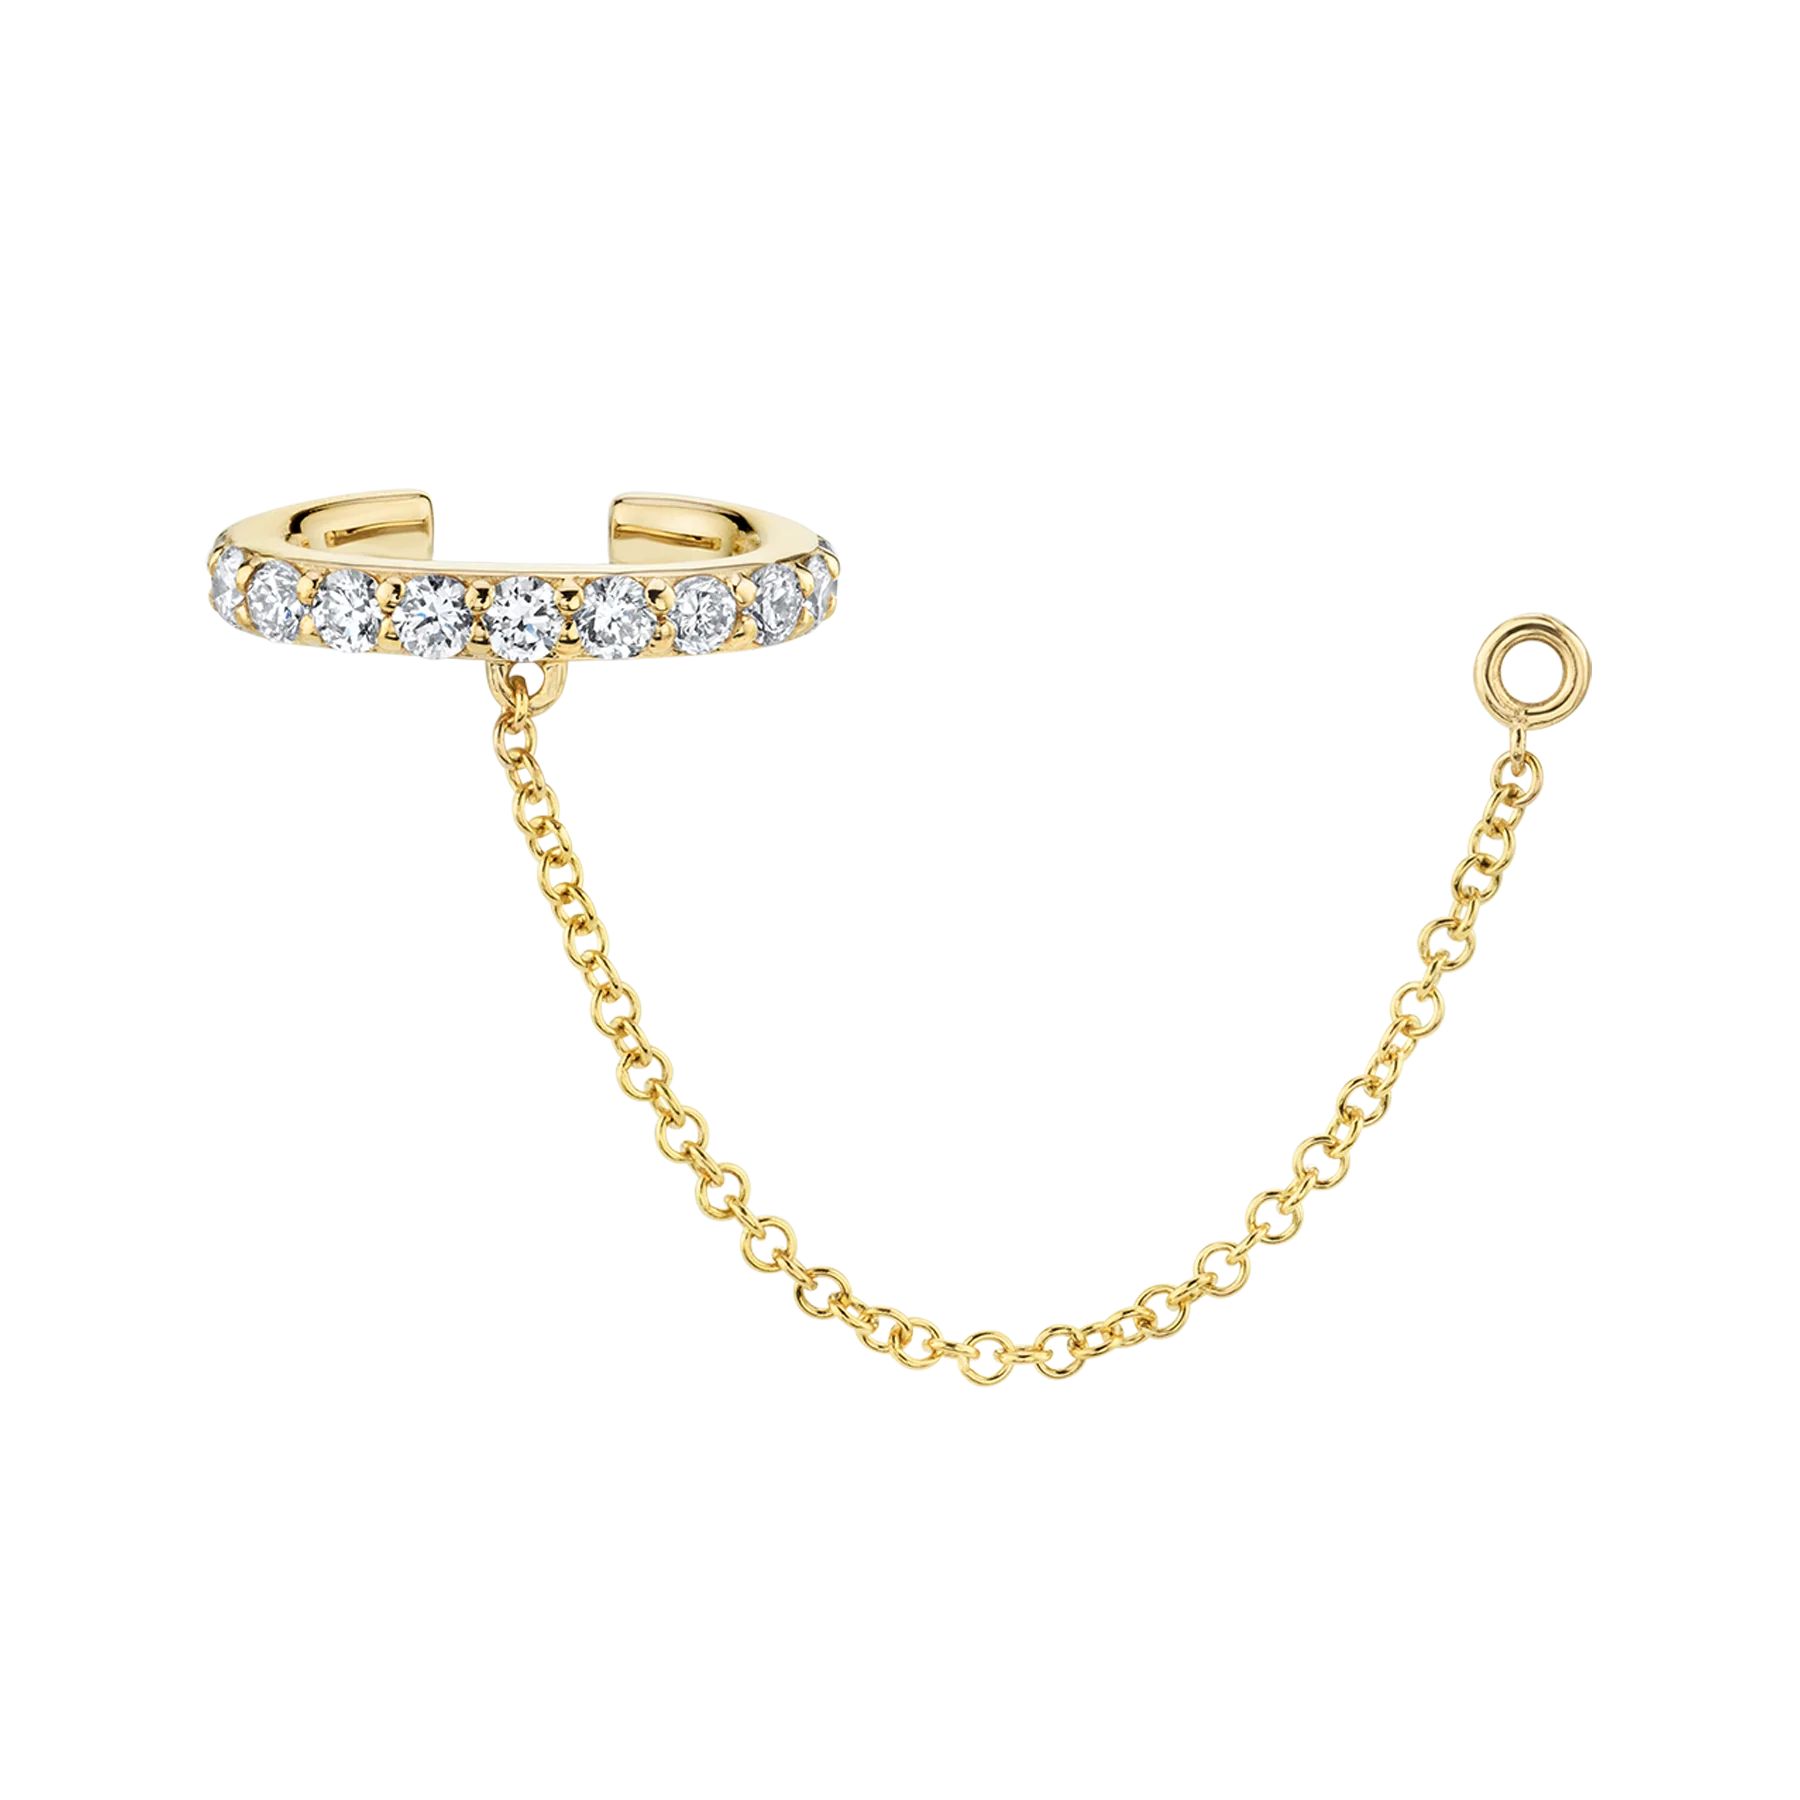 Connected Cuff Earring - White Diamond / 14k Yellow Gold | The Last Line (US)